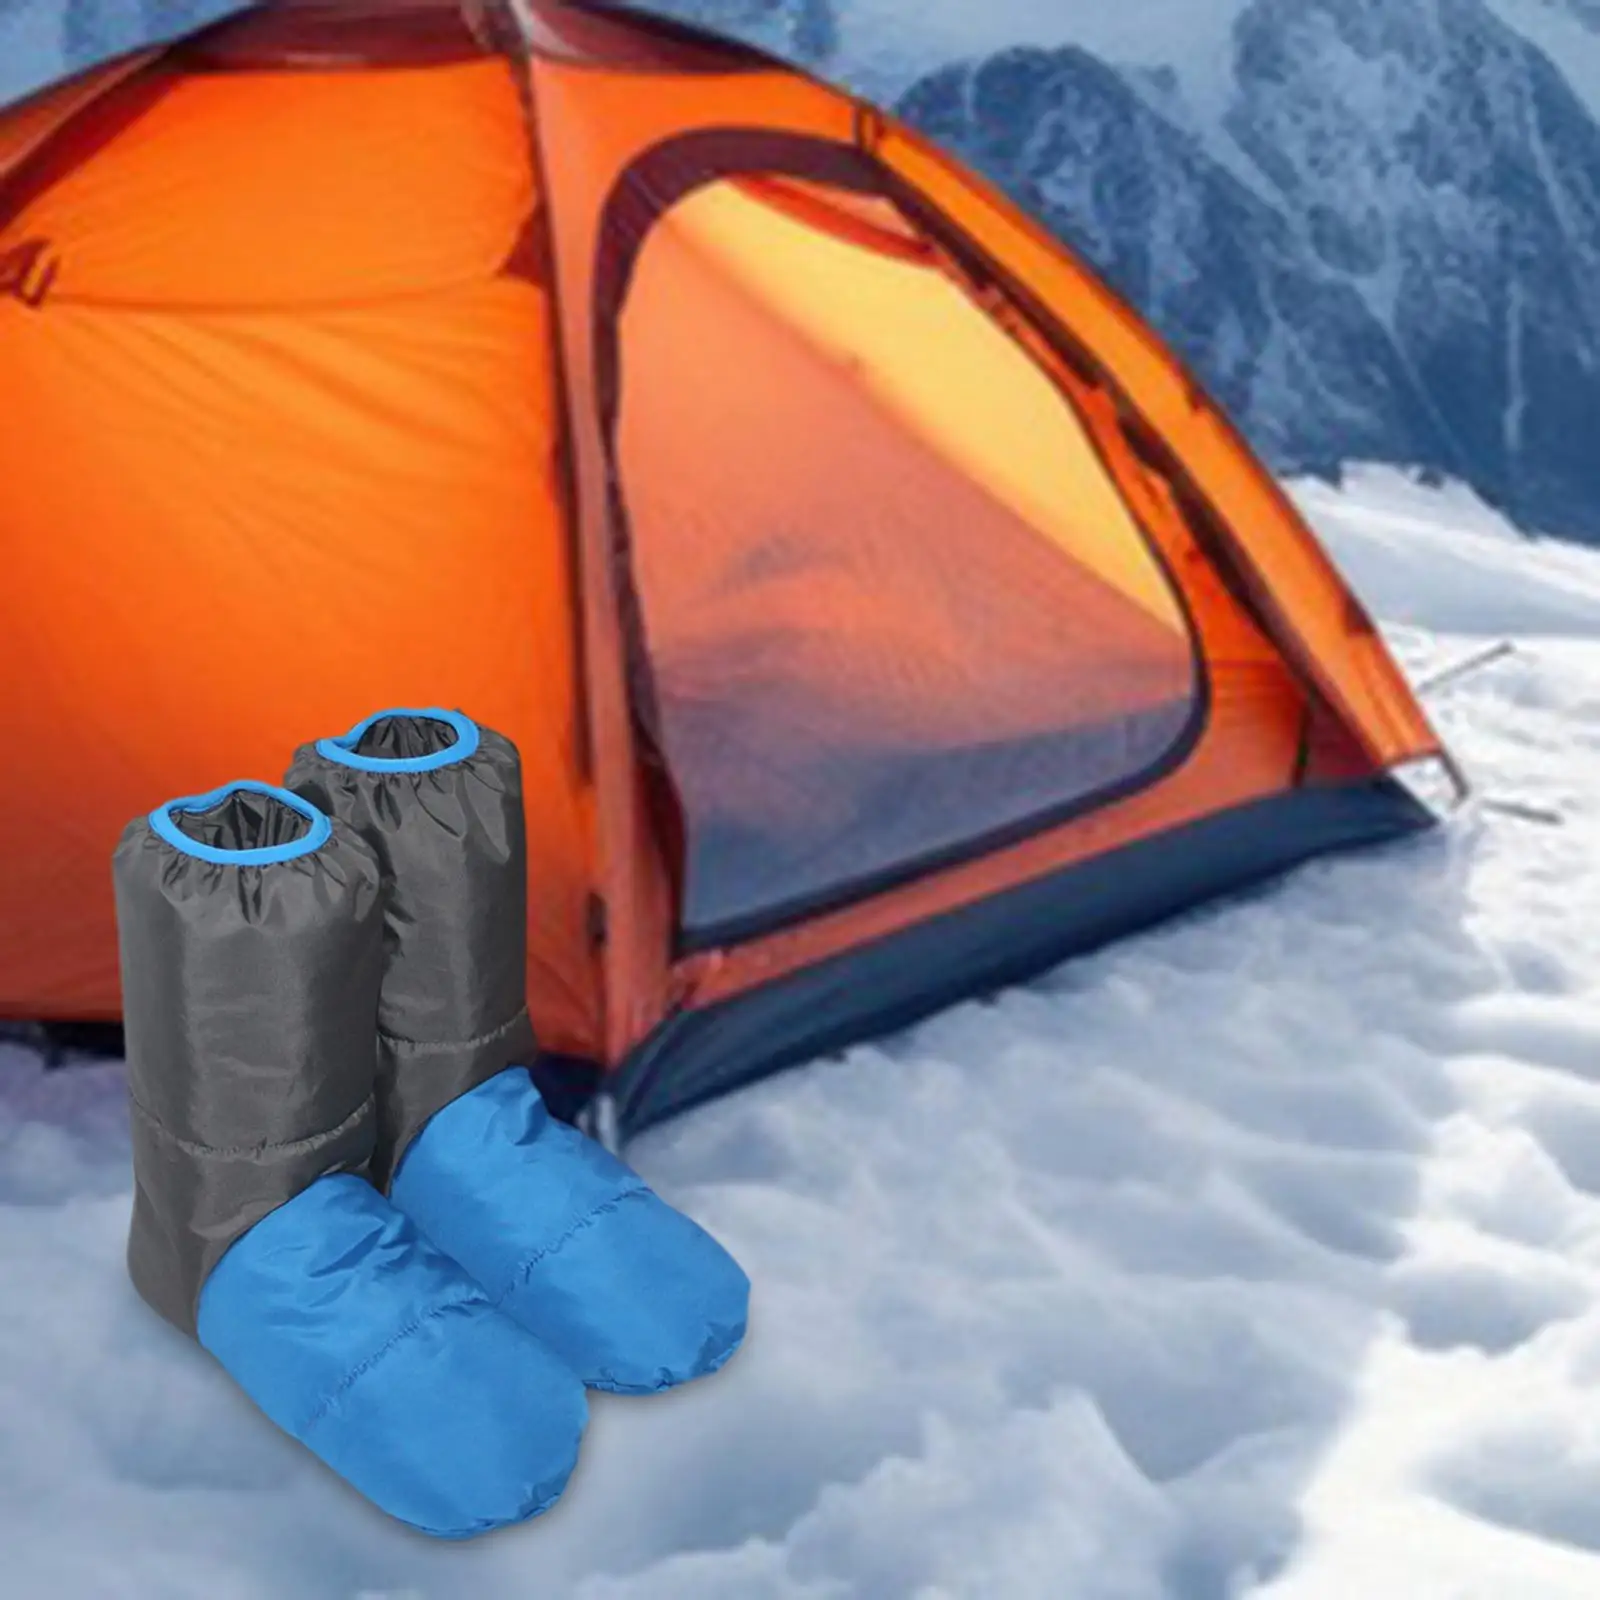 Down Booties Down Shoes Ankle Snow Boots Foot Warmer Cover Windproof Feet Cover Socks Warm Socks for Camping Indoor